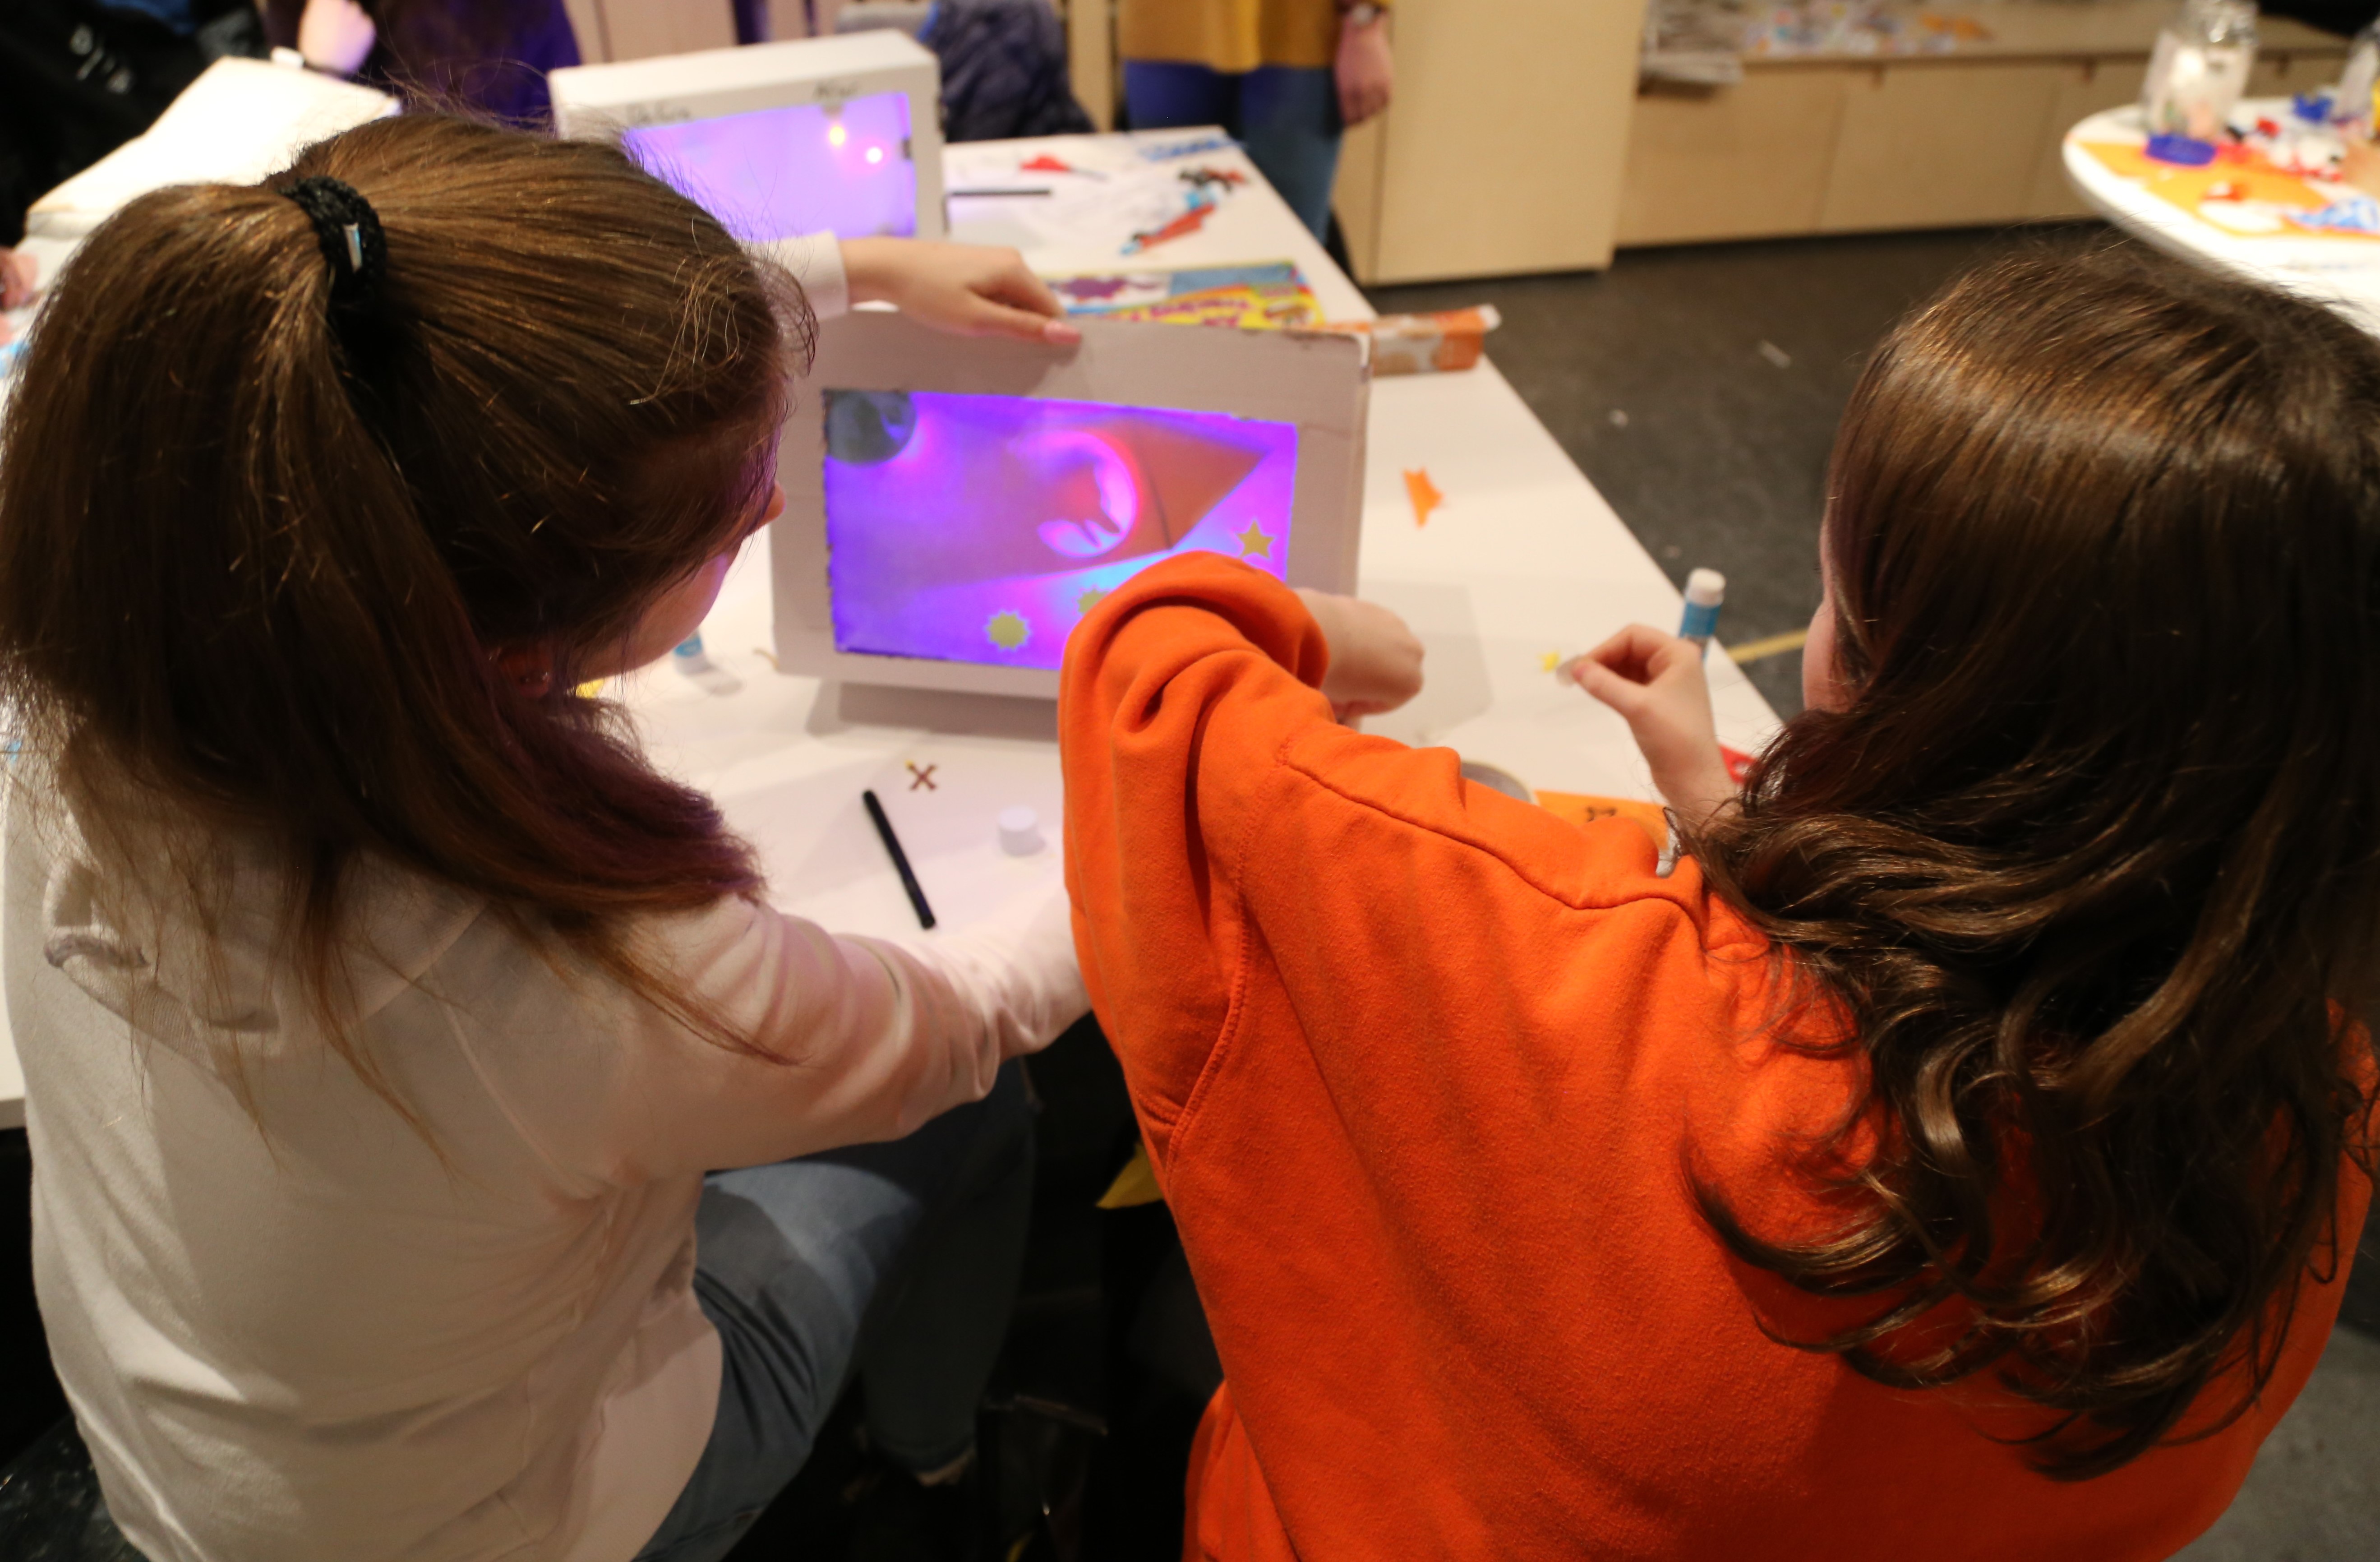 OPEN MIND Studio participants building an electronic diorama to illustrate an Irish folktale. 